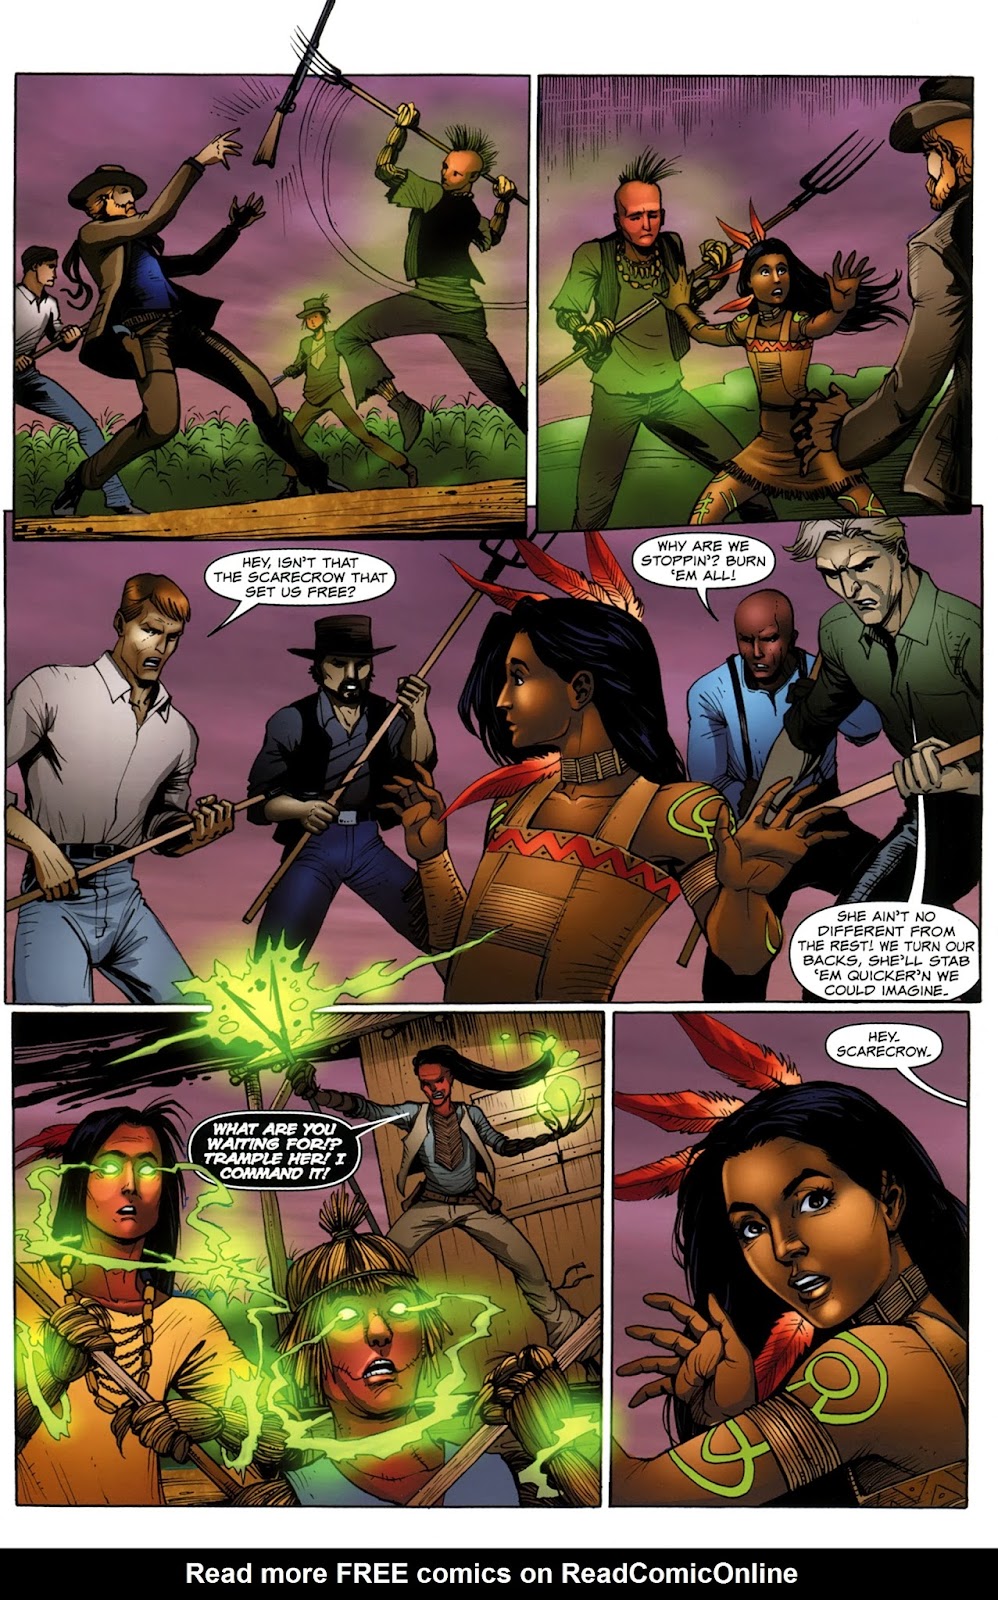 Legends of Oz: The Scarecrow issue 2 - Page 7